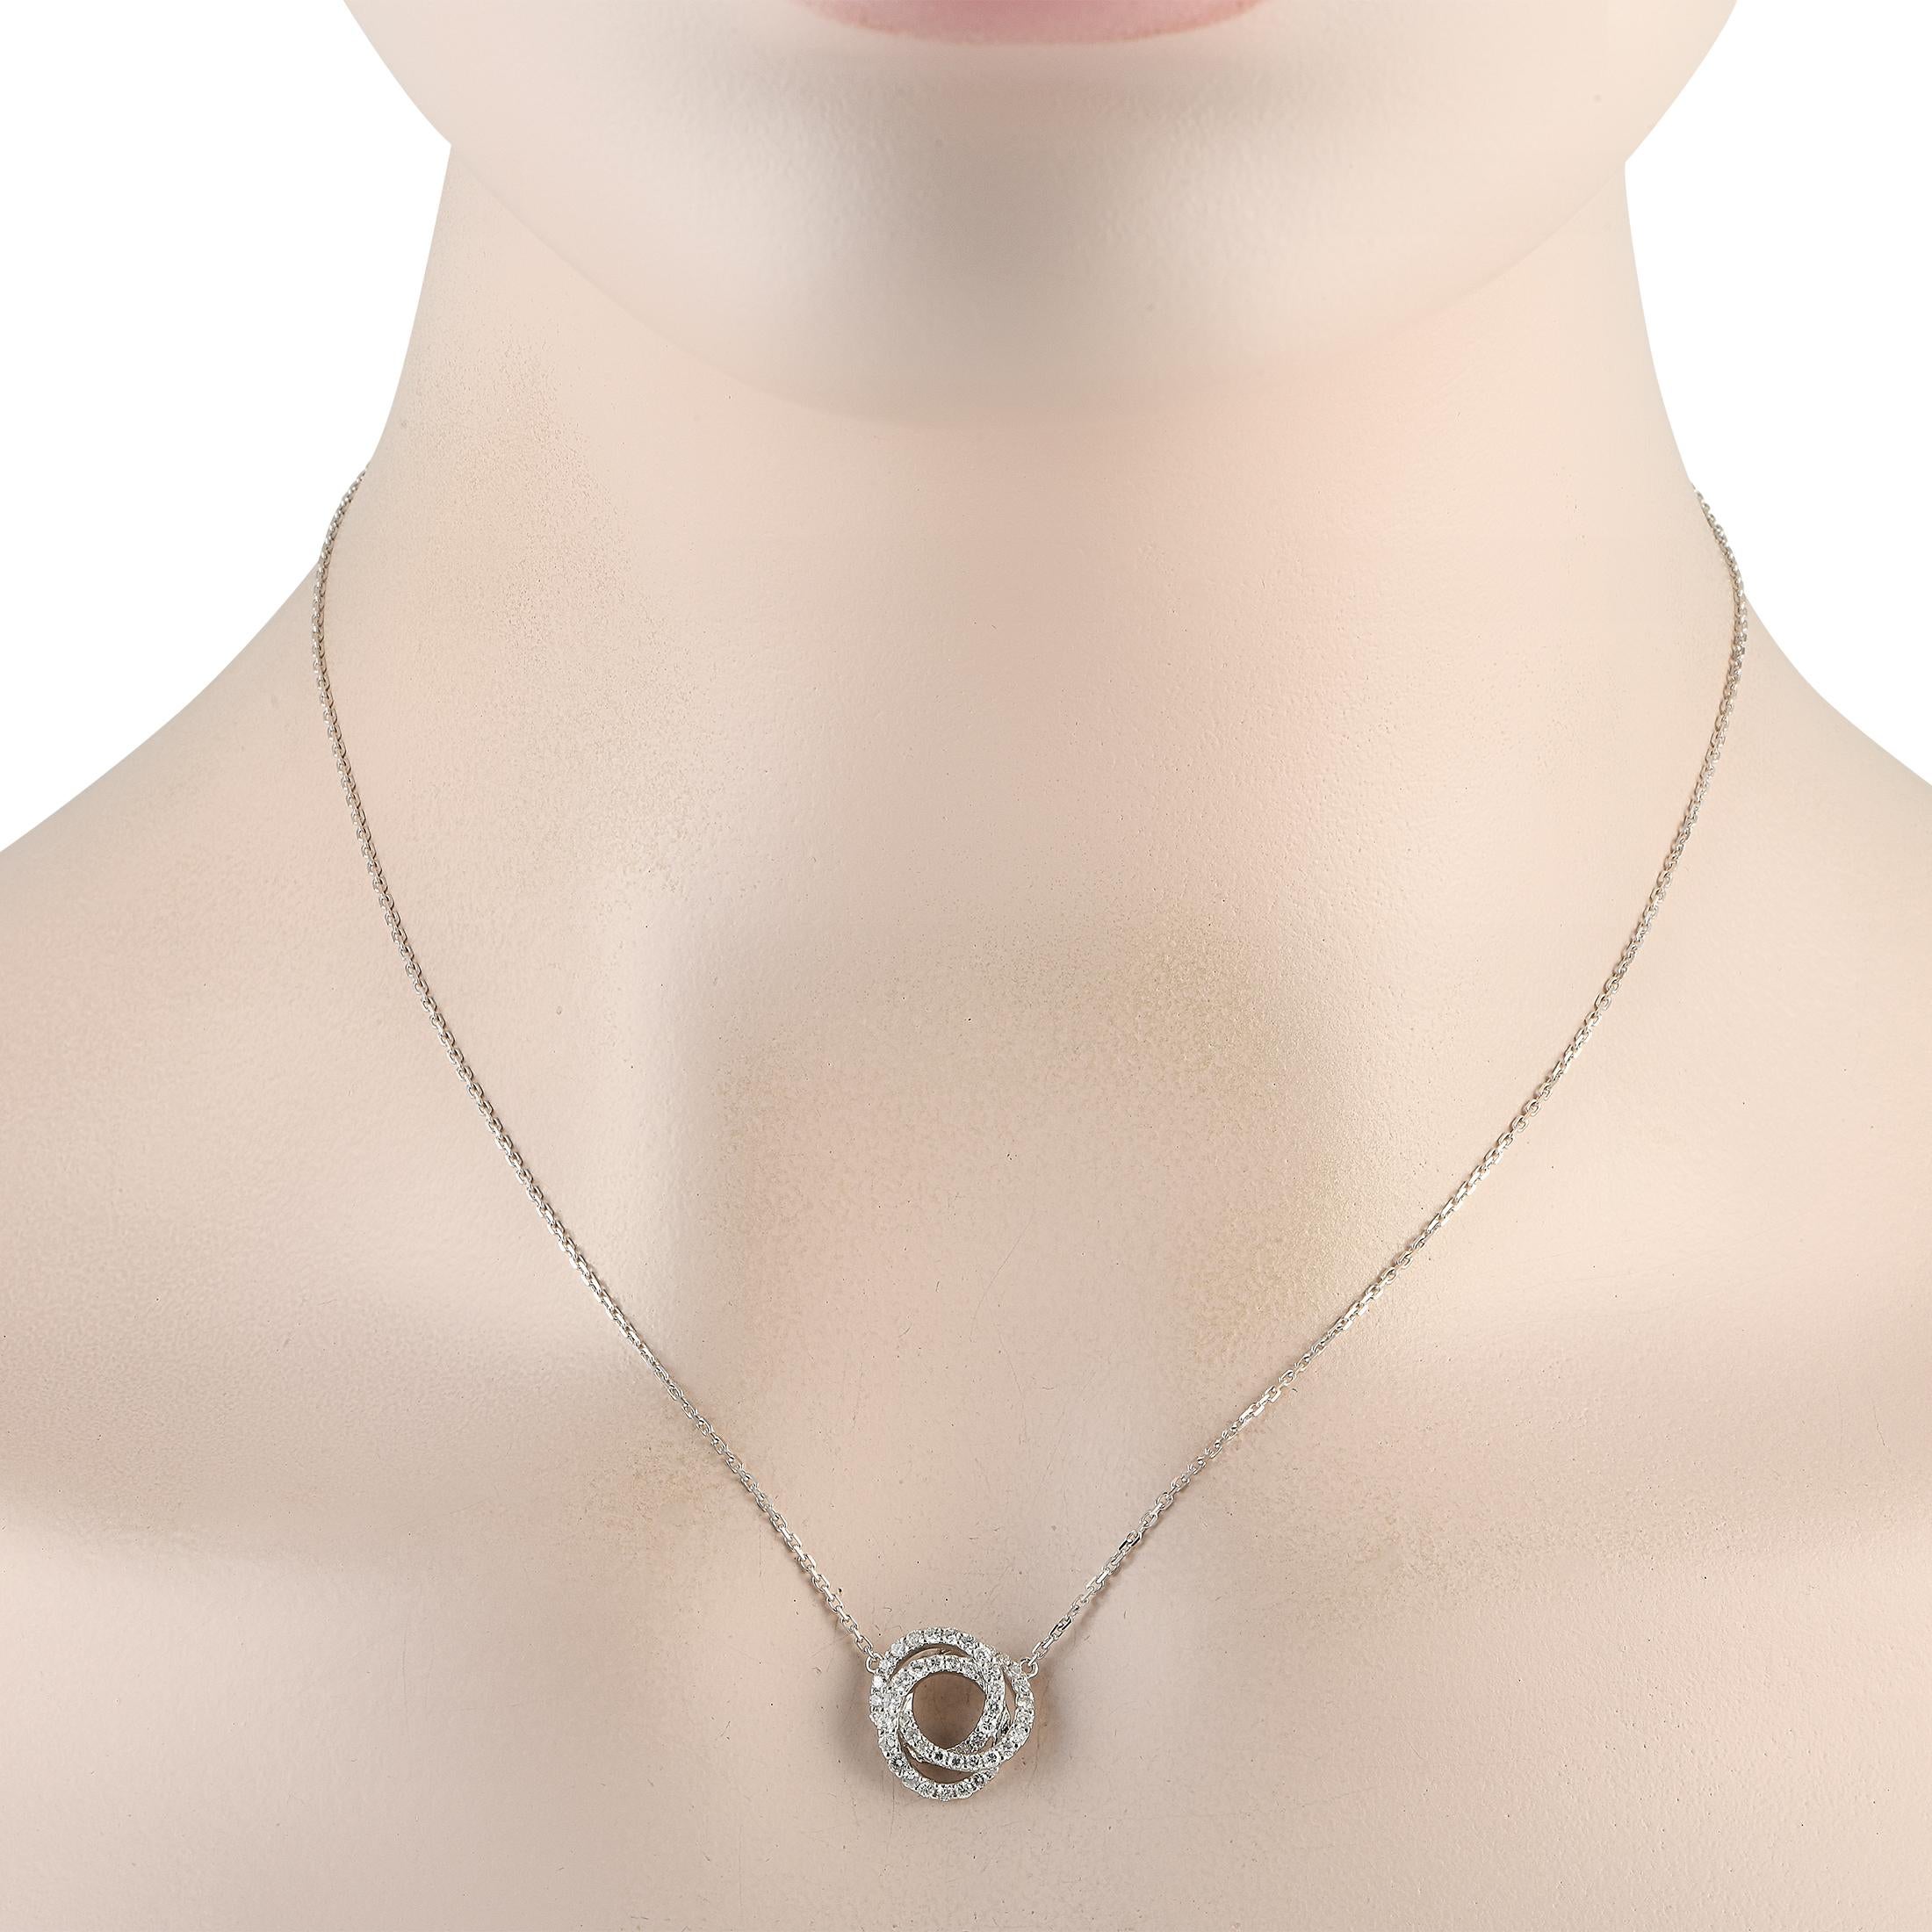 An instant stand-out, this necklace can add a sophisticated flair to your wardrobe. It is made from 18K white gold and has three interlocking rings for its pendant. Each ring is outlined with round diamonds for a captivating sparkle.Offered brand